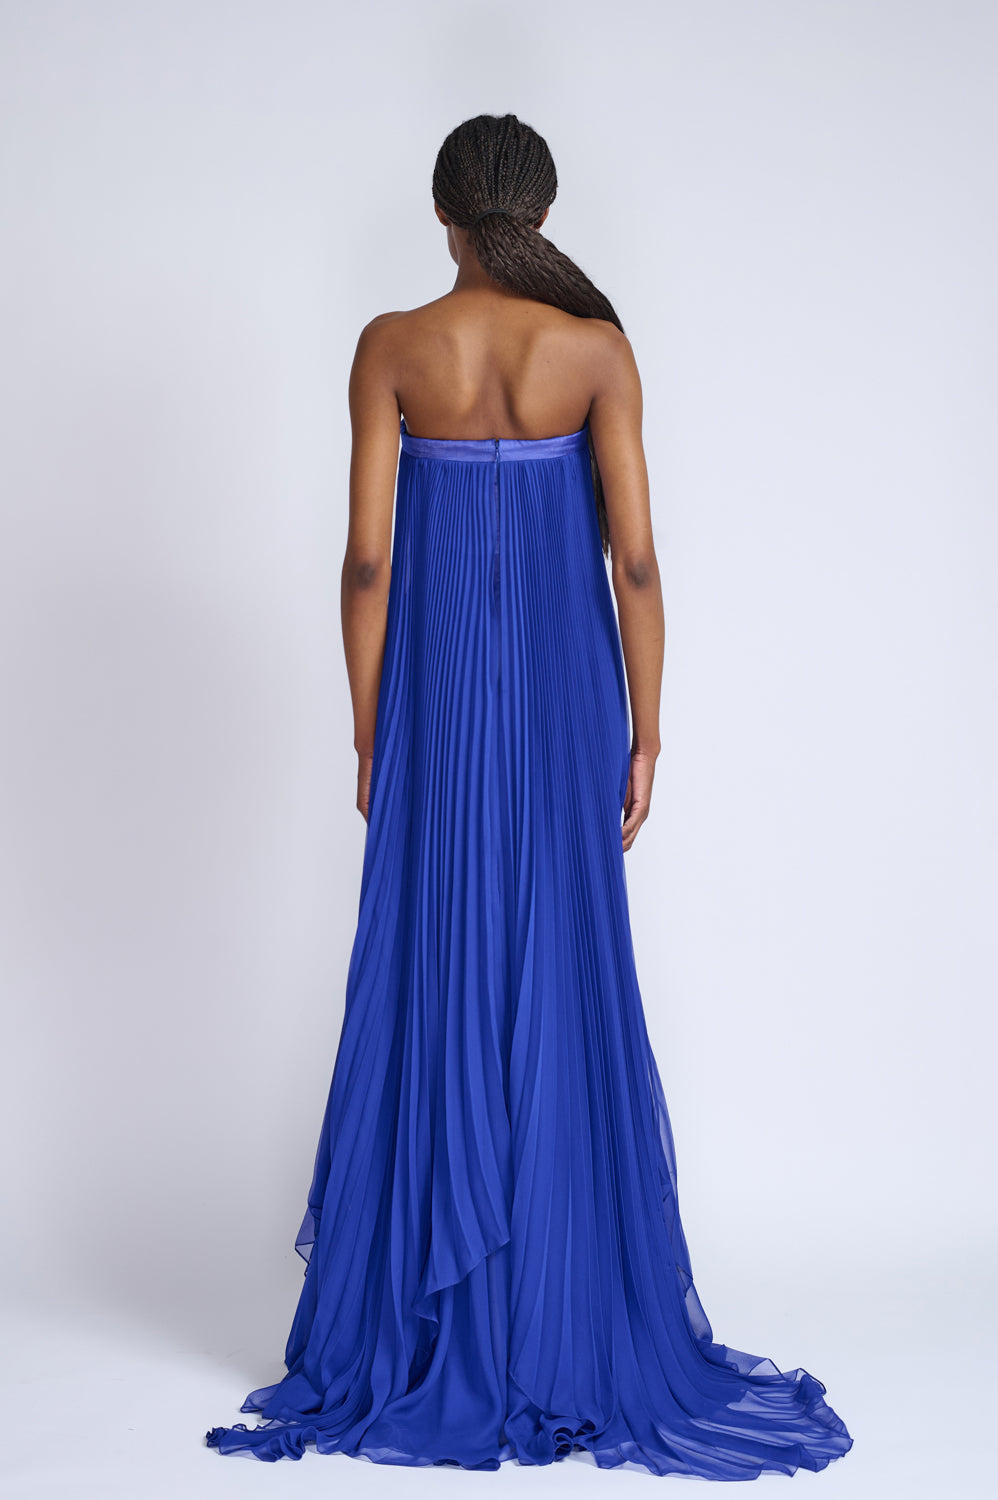 Yves Blue Organza and Chiffon Strapless Gown With Sapphire Fleur Embroidery 3